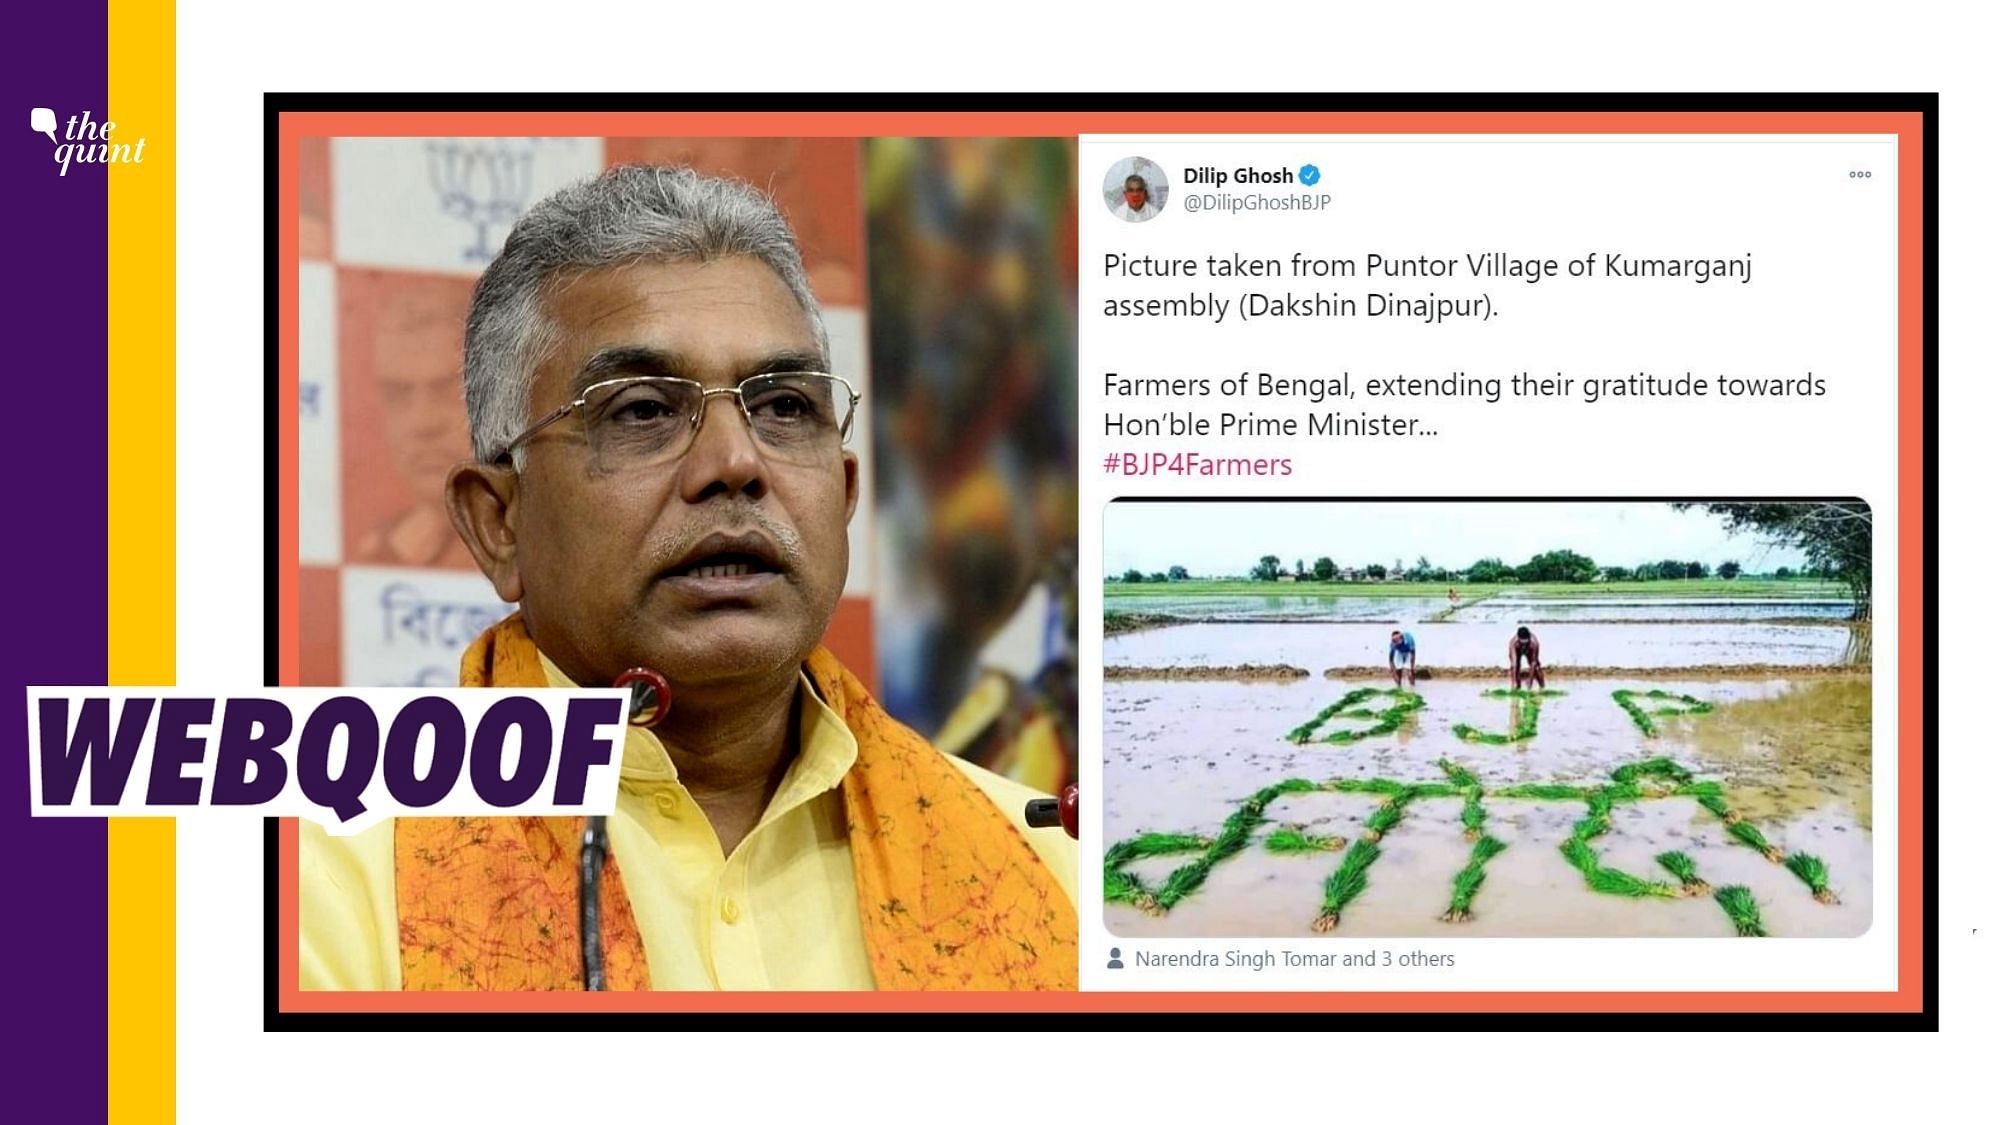 Dilip Ghosh shared an image purportedly from a field in West Bengal to claim that it shows farmers in the state “extending their gratitude towards Prime Minister Modi”.